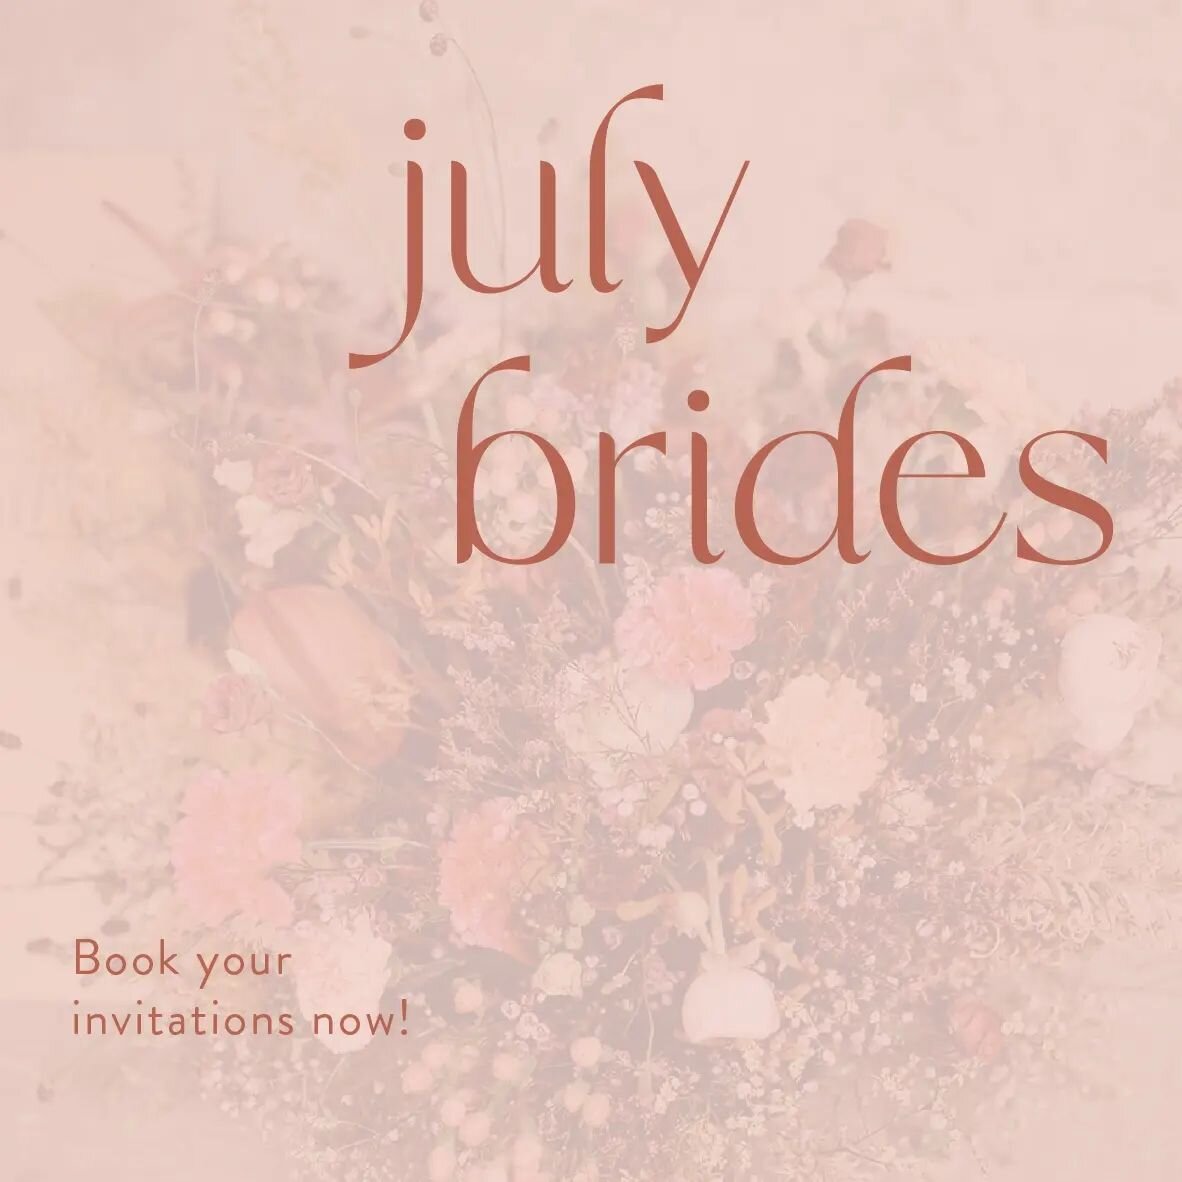 Just off a call earlier with a lovely July bride who asked me if she was late booking her stationery...just in time was my answer! I thought it might be wise to post a studio schedule update, as things are getting full around here. Wedding season is 